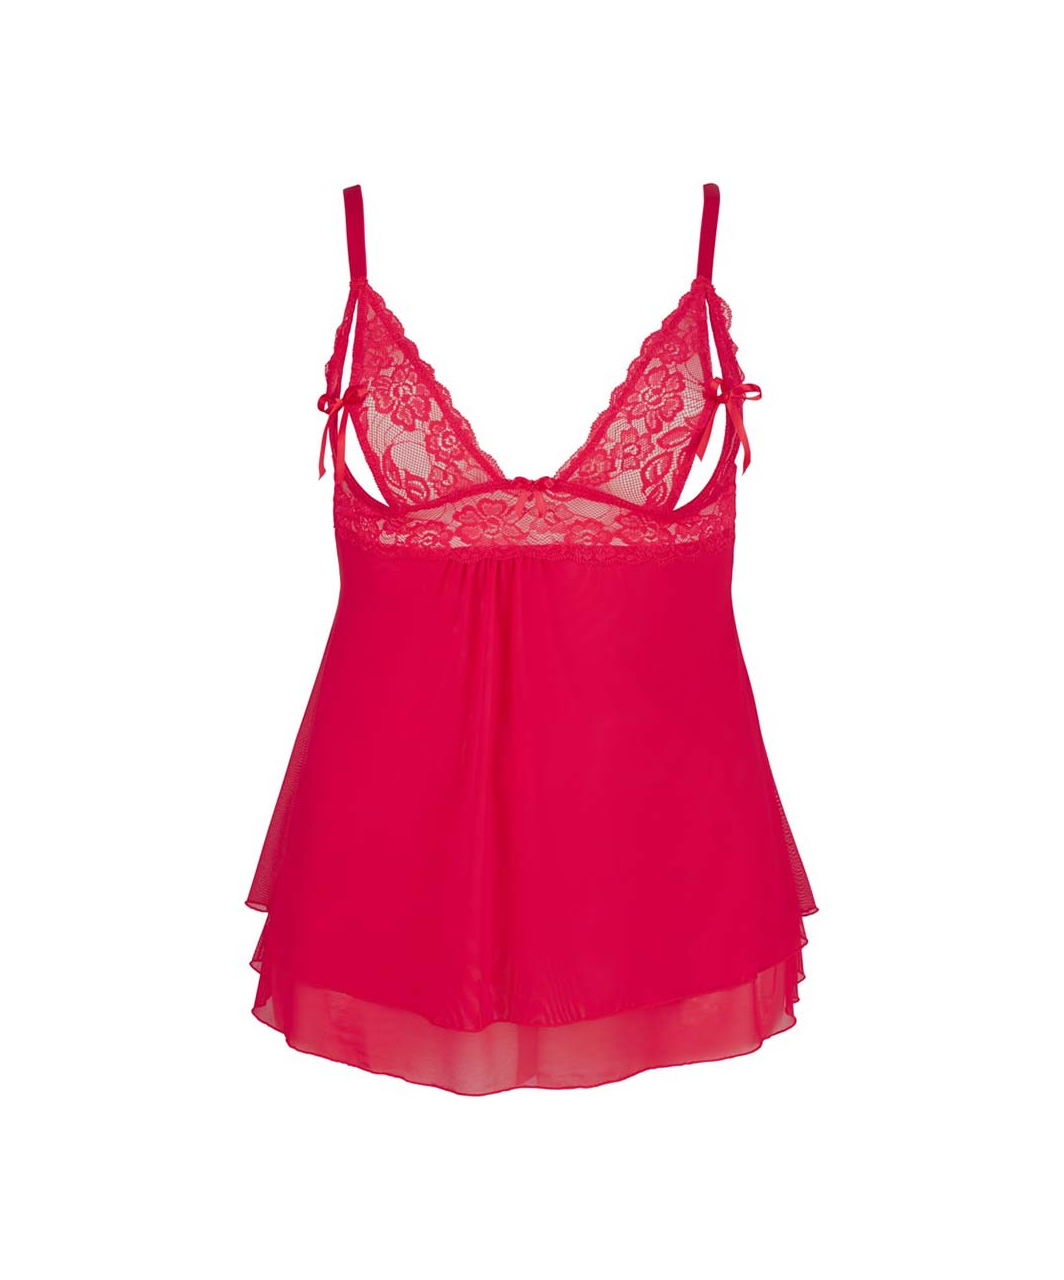 Cottelli Lingerie Red Lace Babydoll